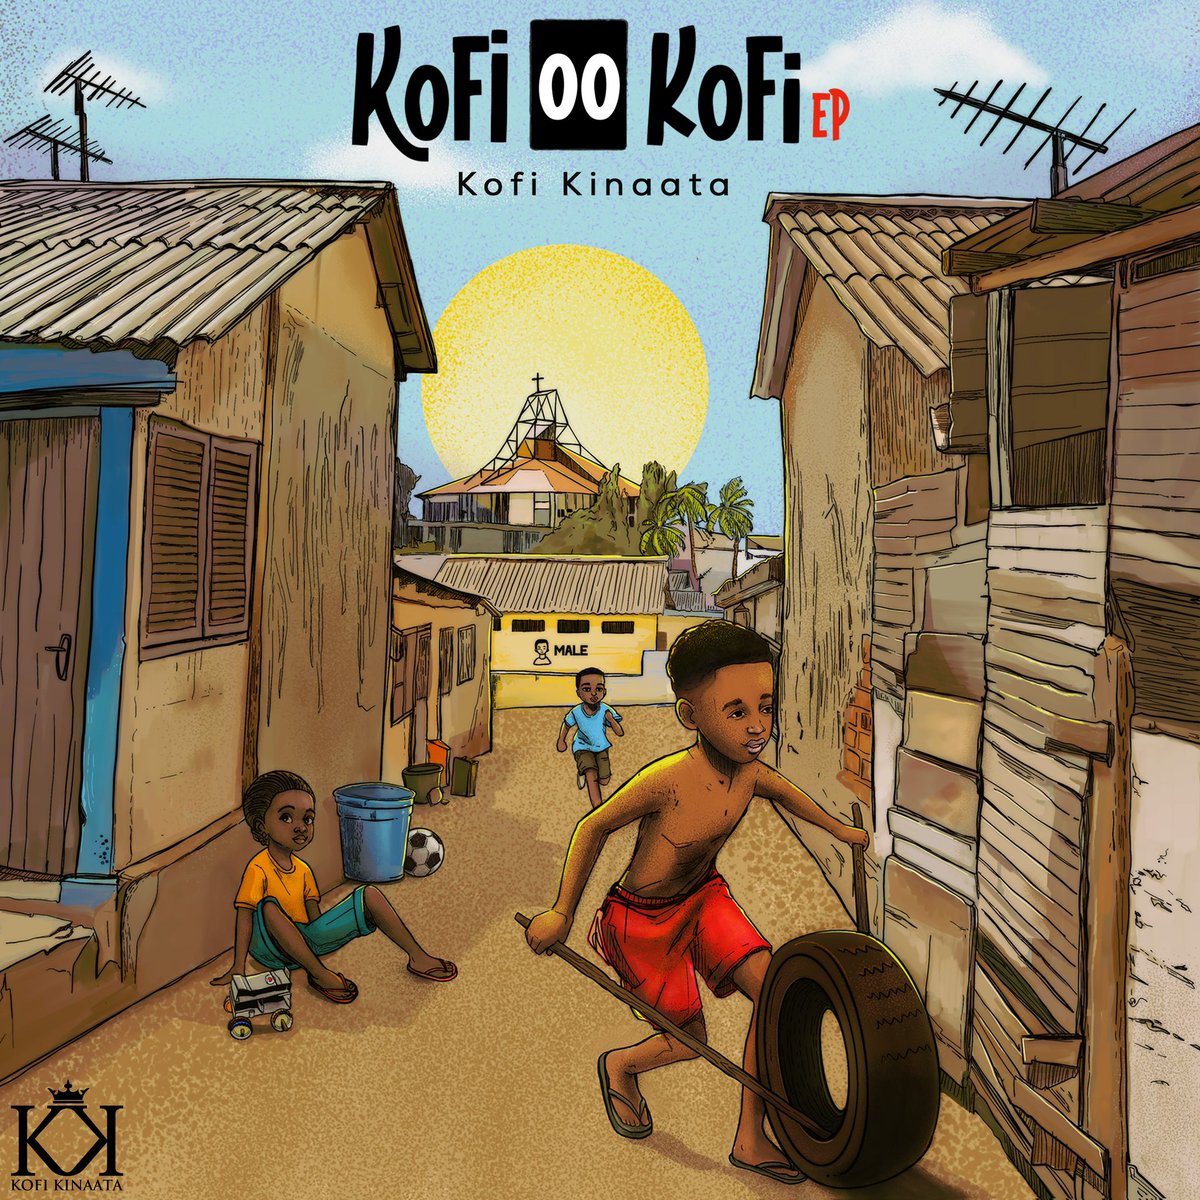 In Ghana 🇬🇭 a male Friday born is called KOFI. This Friday, #KofiOOKofi 🔥 EP will be born! Just Know! #TeamMooove